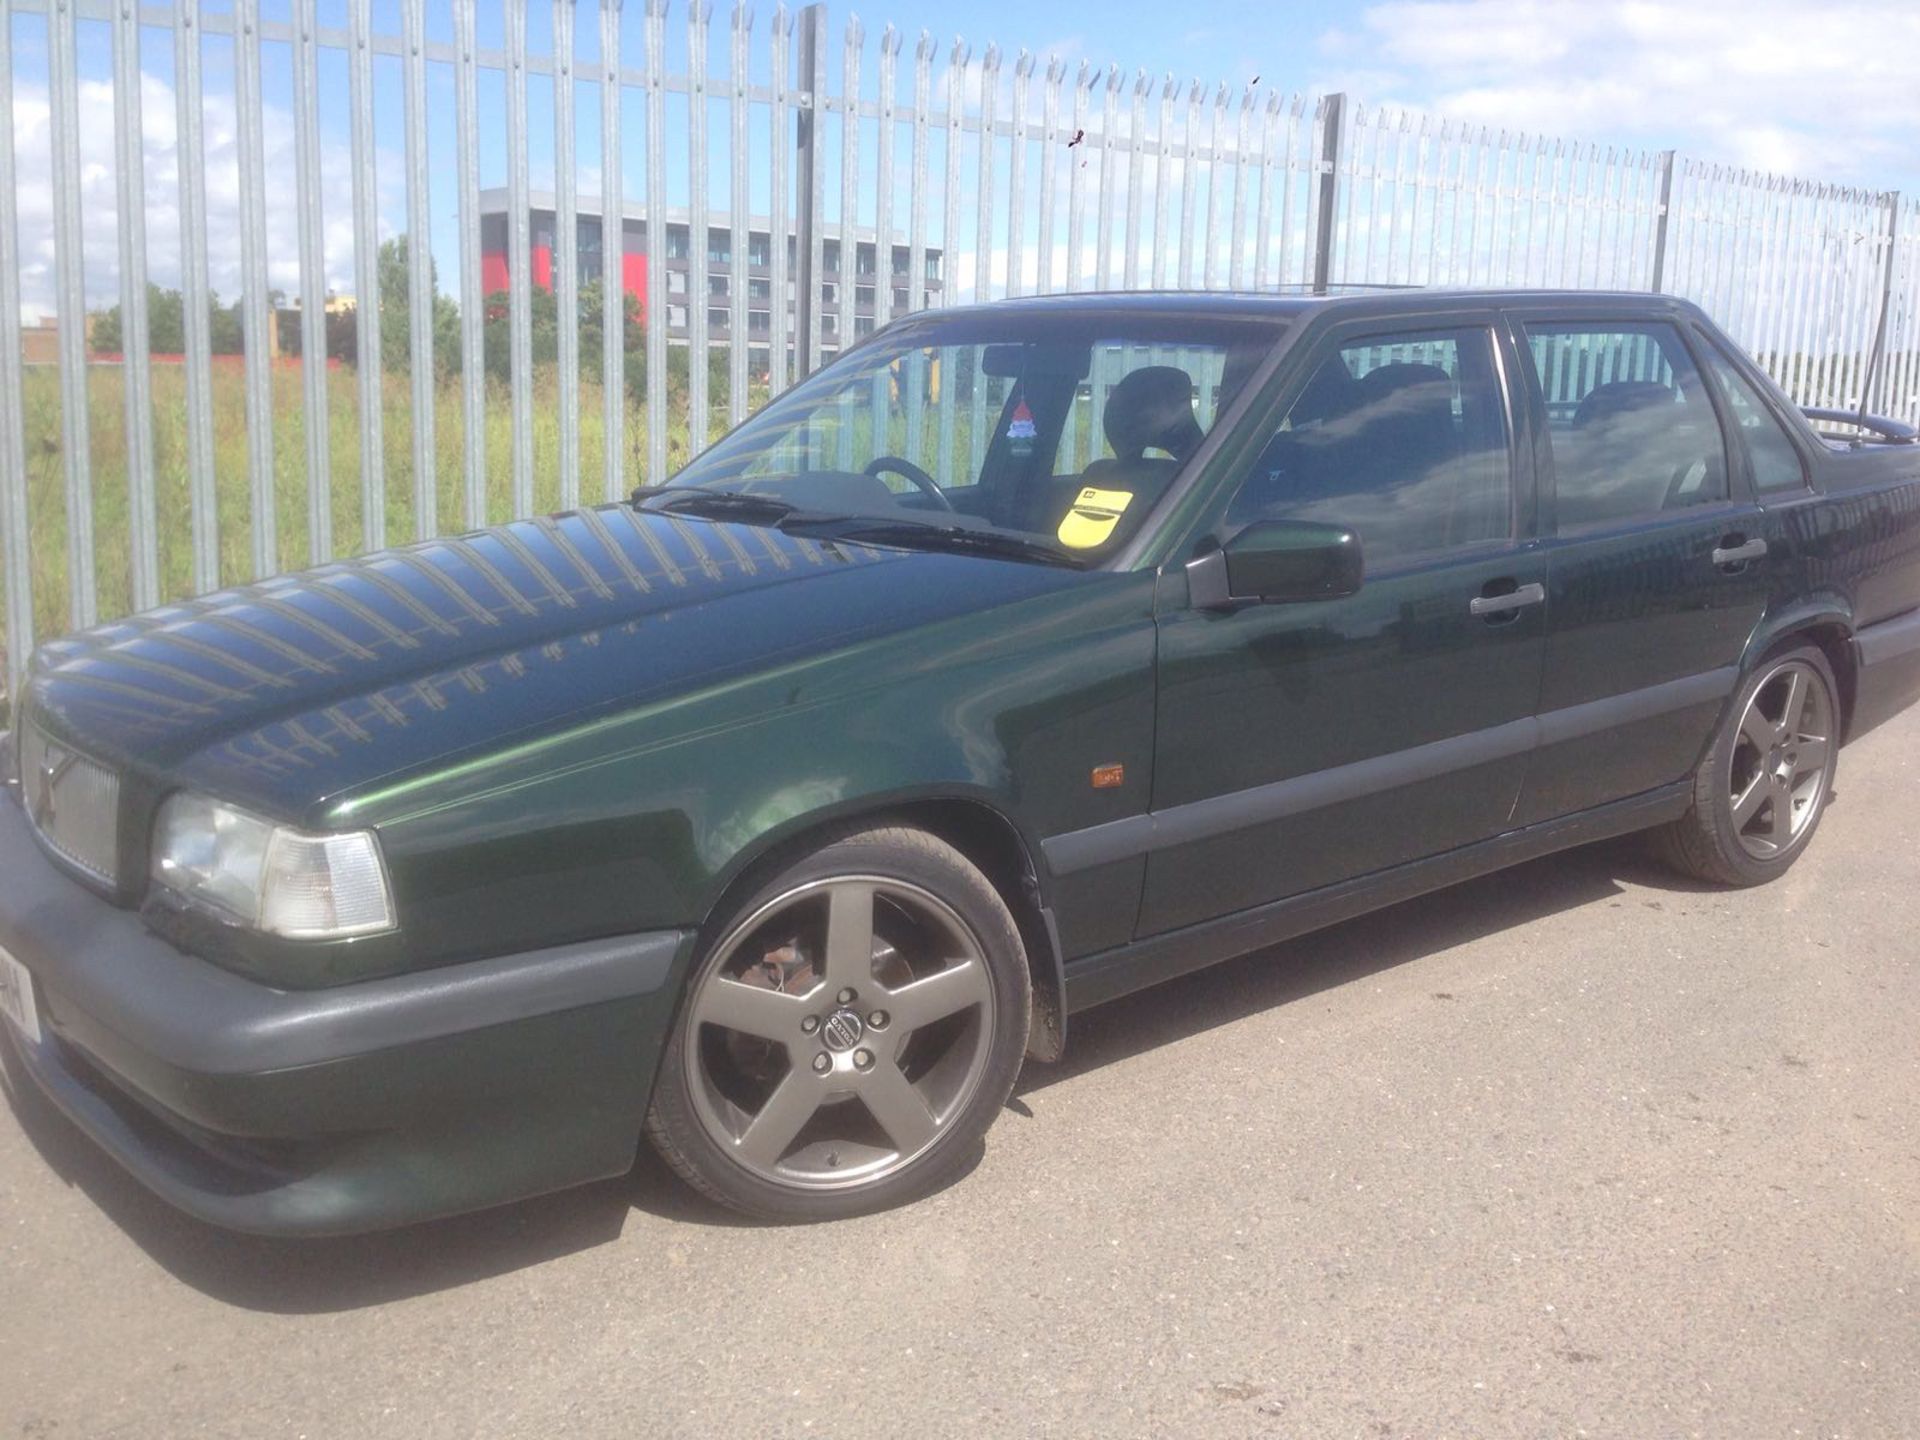 VOLVO T5-R saloon auto, 1995/N. olive green, - Image 2 of 18